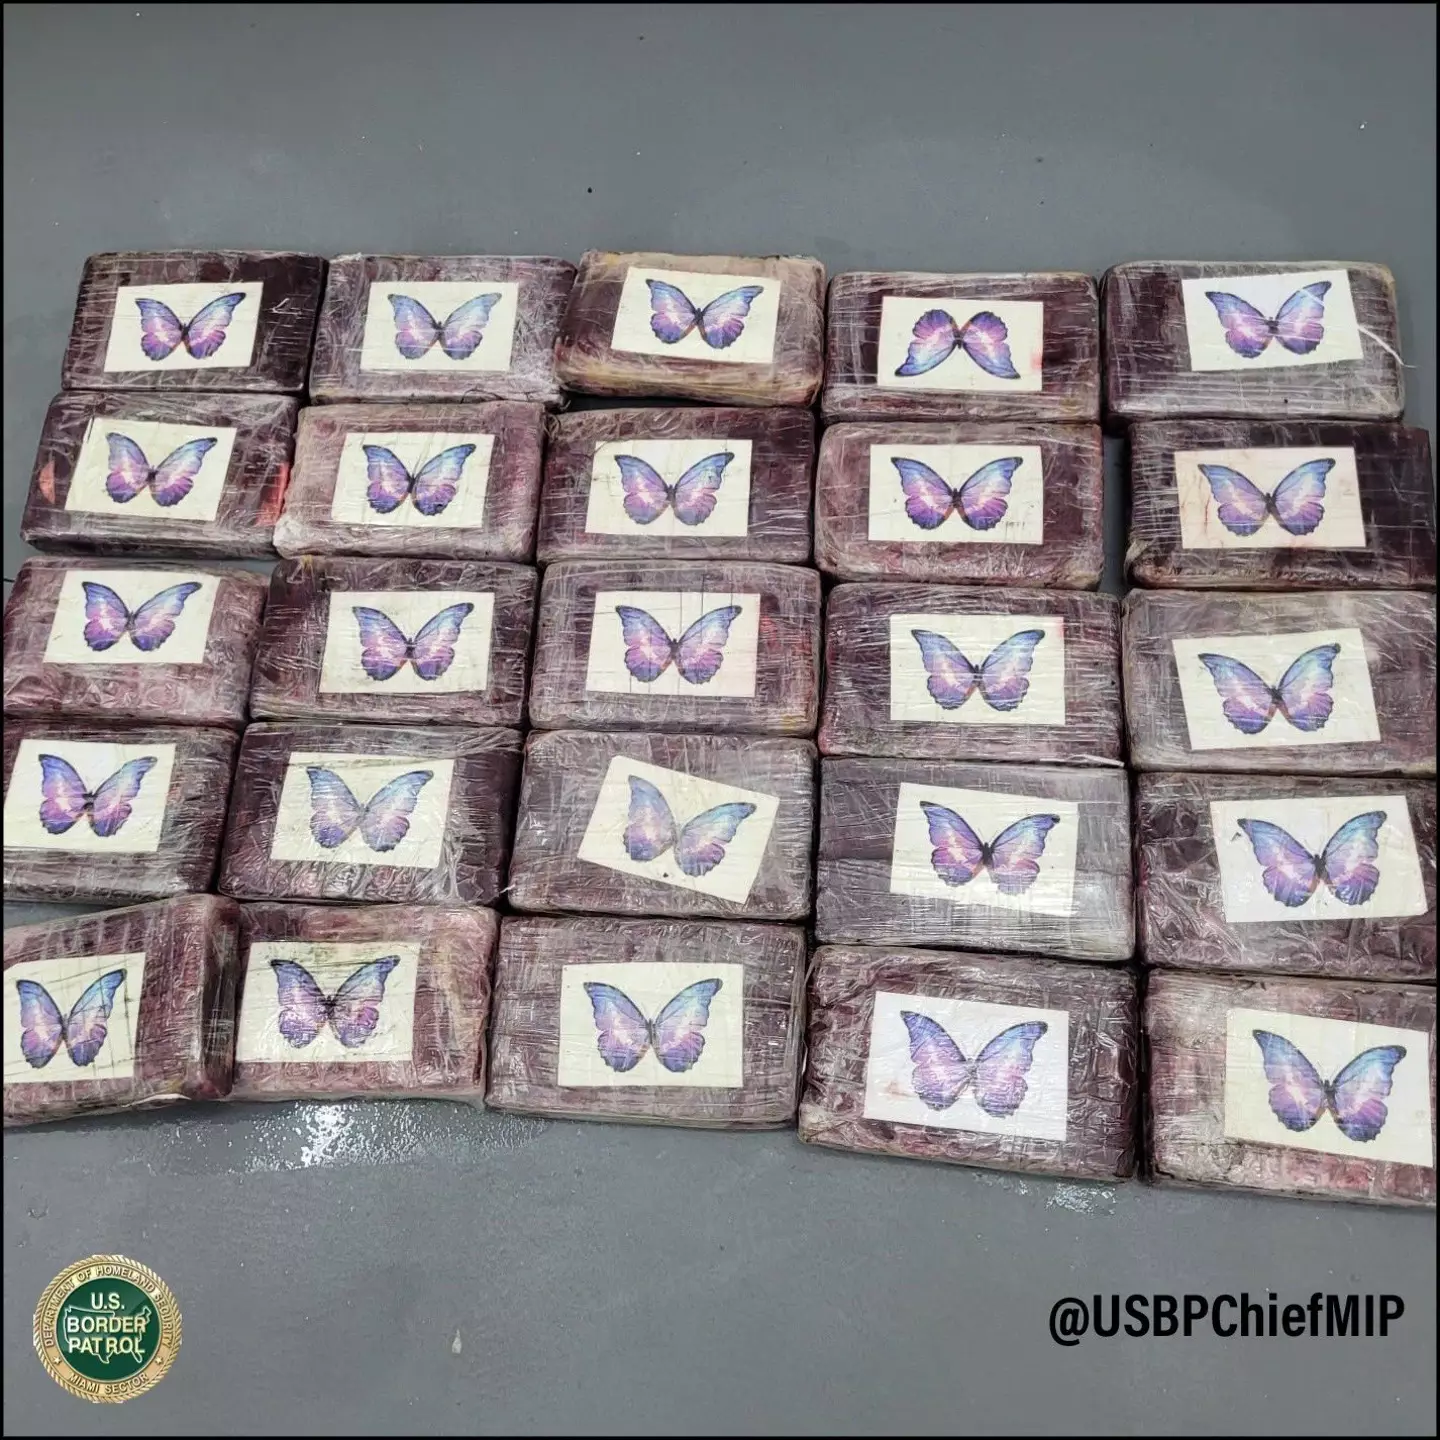 Cocaine seized by the US Border Patrol after being spotted by Tampa Mayor Jane Castor. (US Border Patrol)